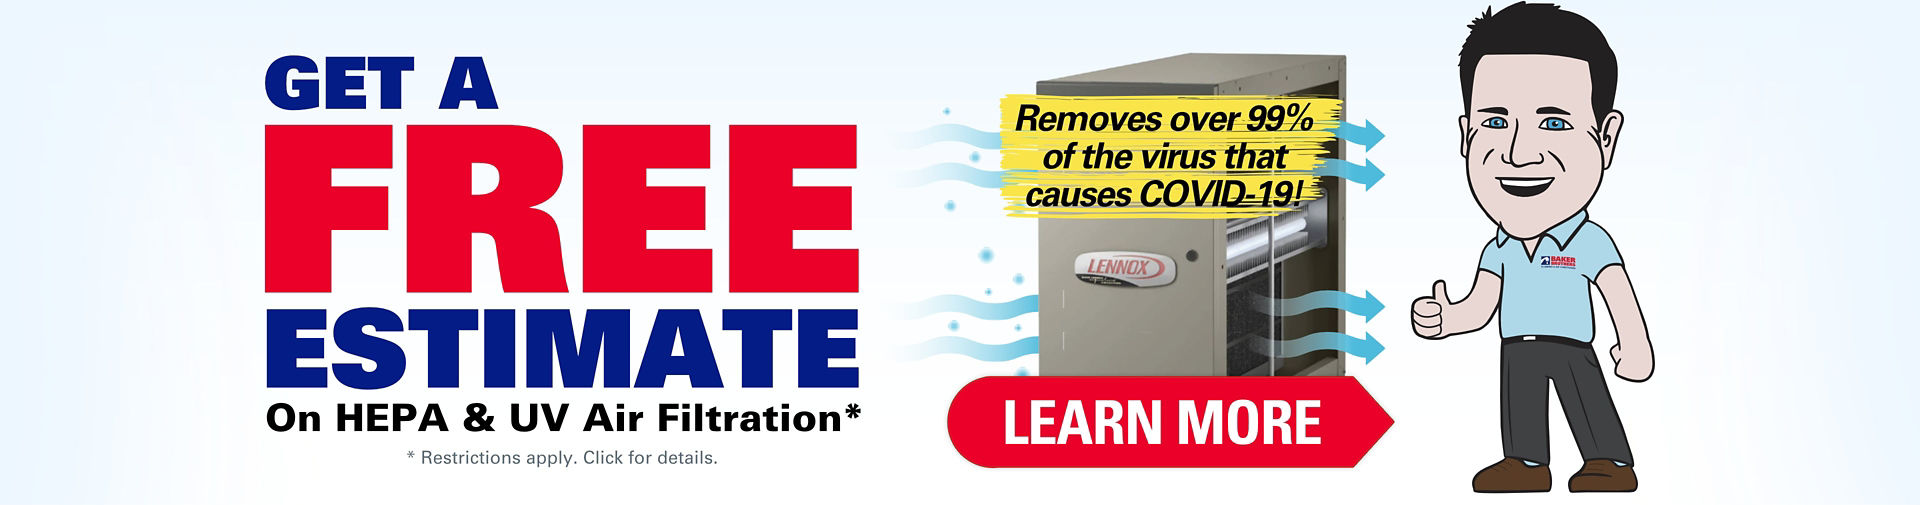 Get A Free Estimate on HEPA and UV Air Filtration